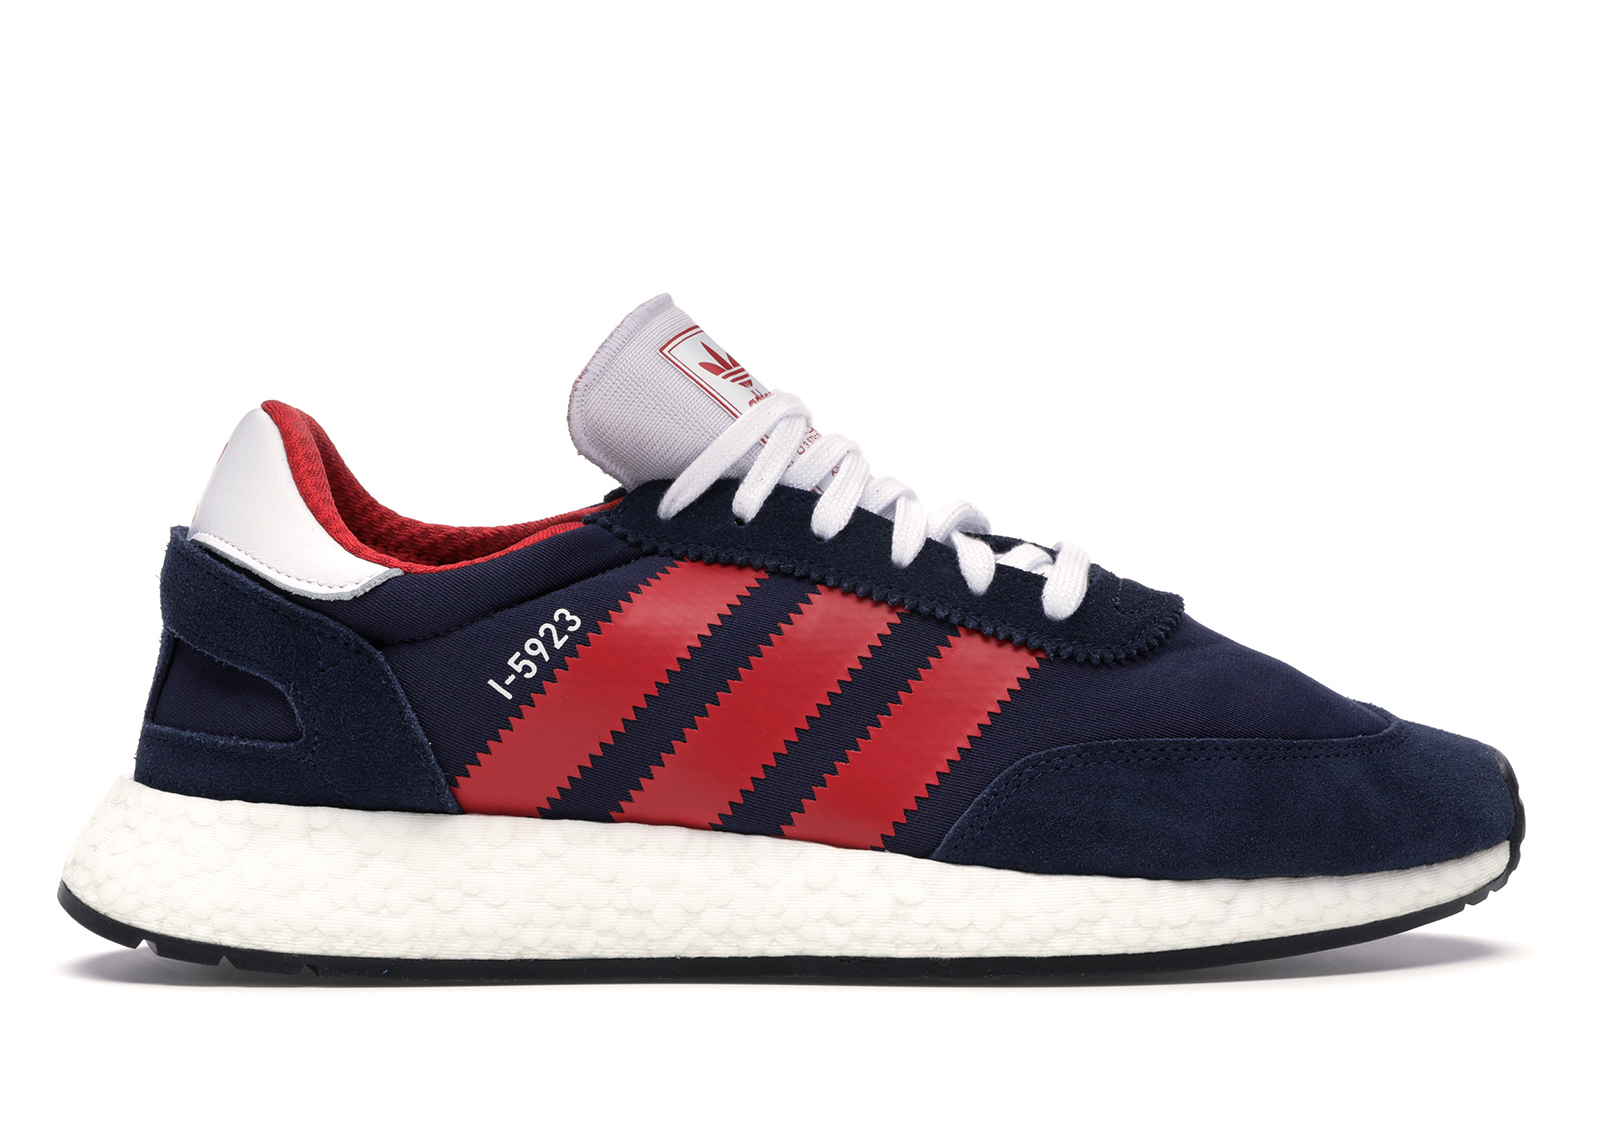 Llamarada Perenne Armonioso Adidas I 5923 Red White And Blue Online Sale, UP TO 54% OFF